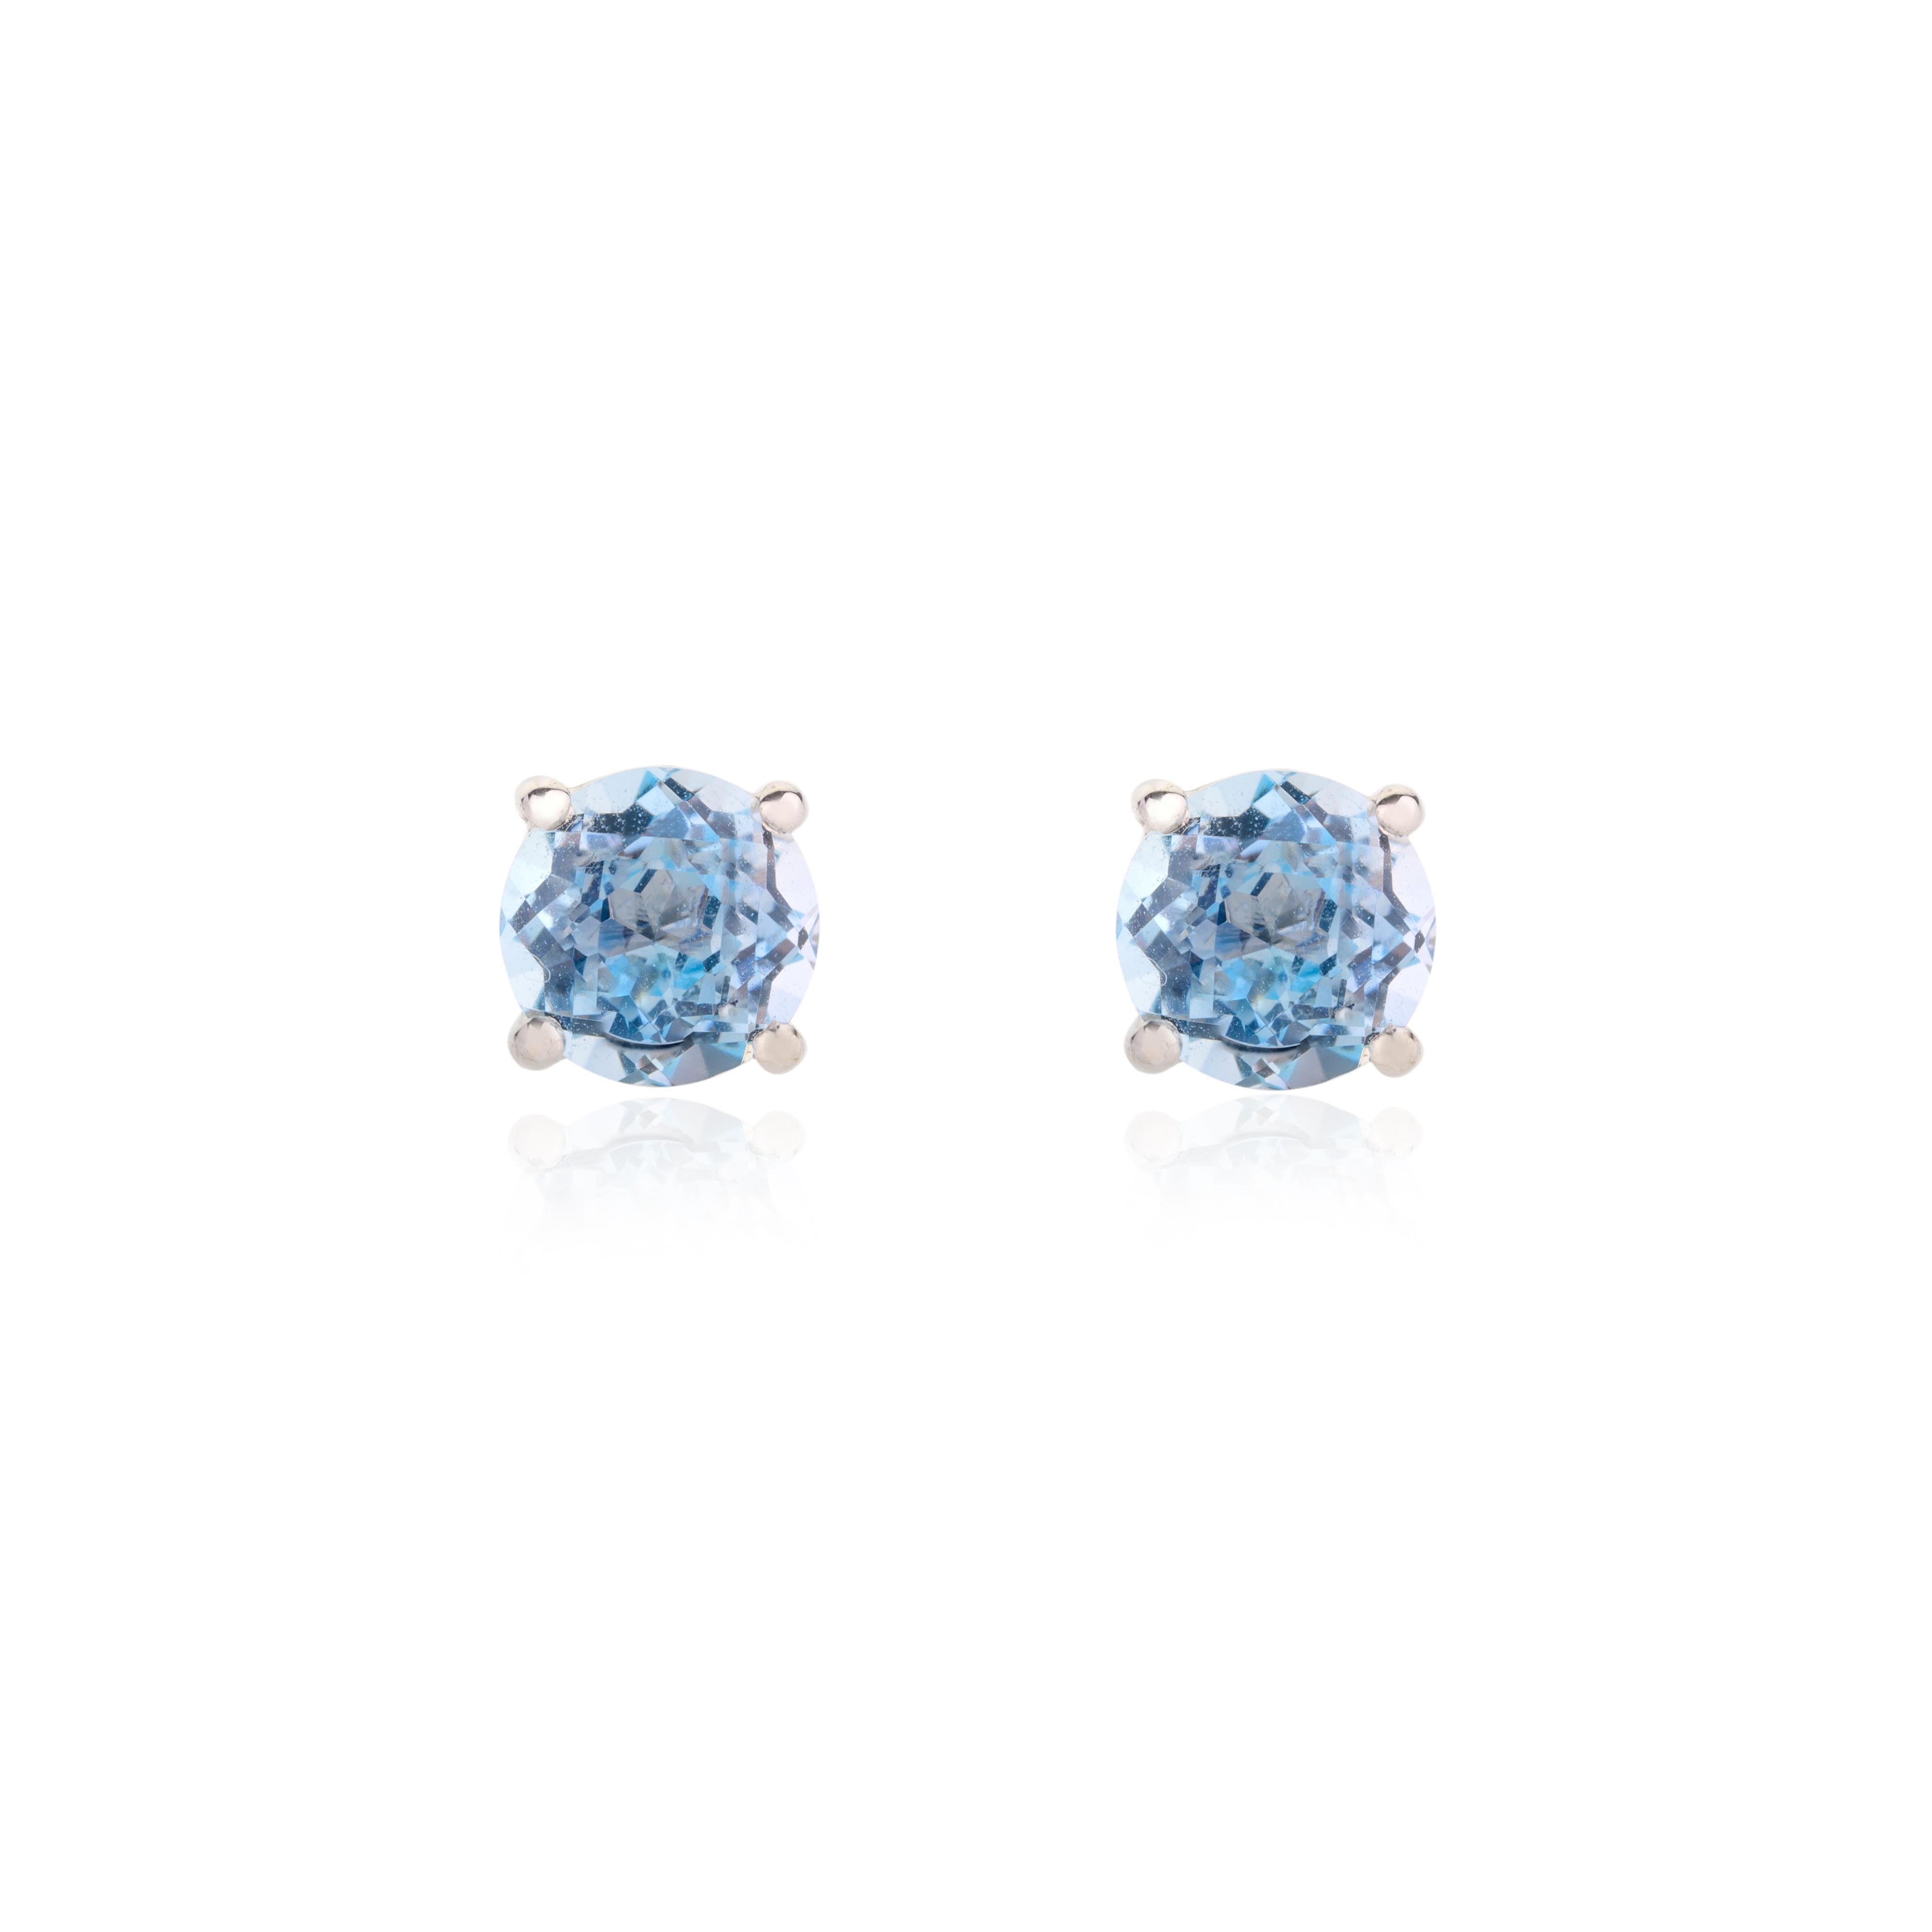 Enchanting 14k Solid White Gold Dainty Round Blue Topaz Stud Earrings 1